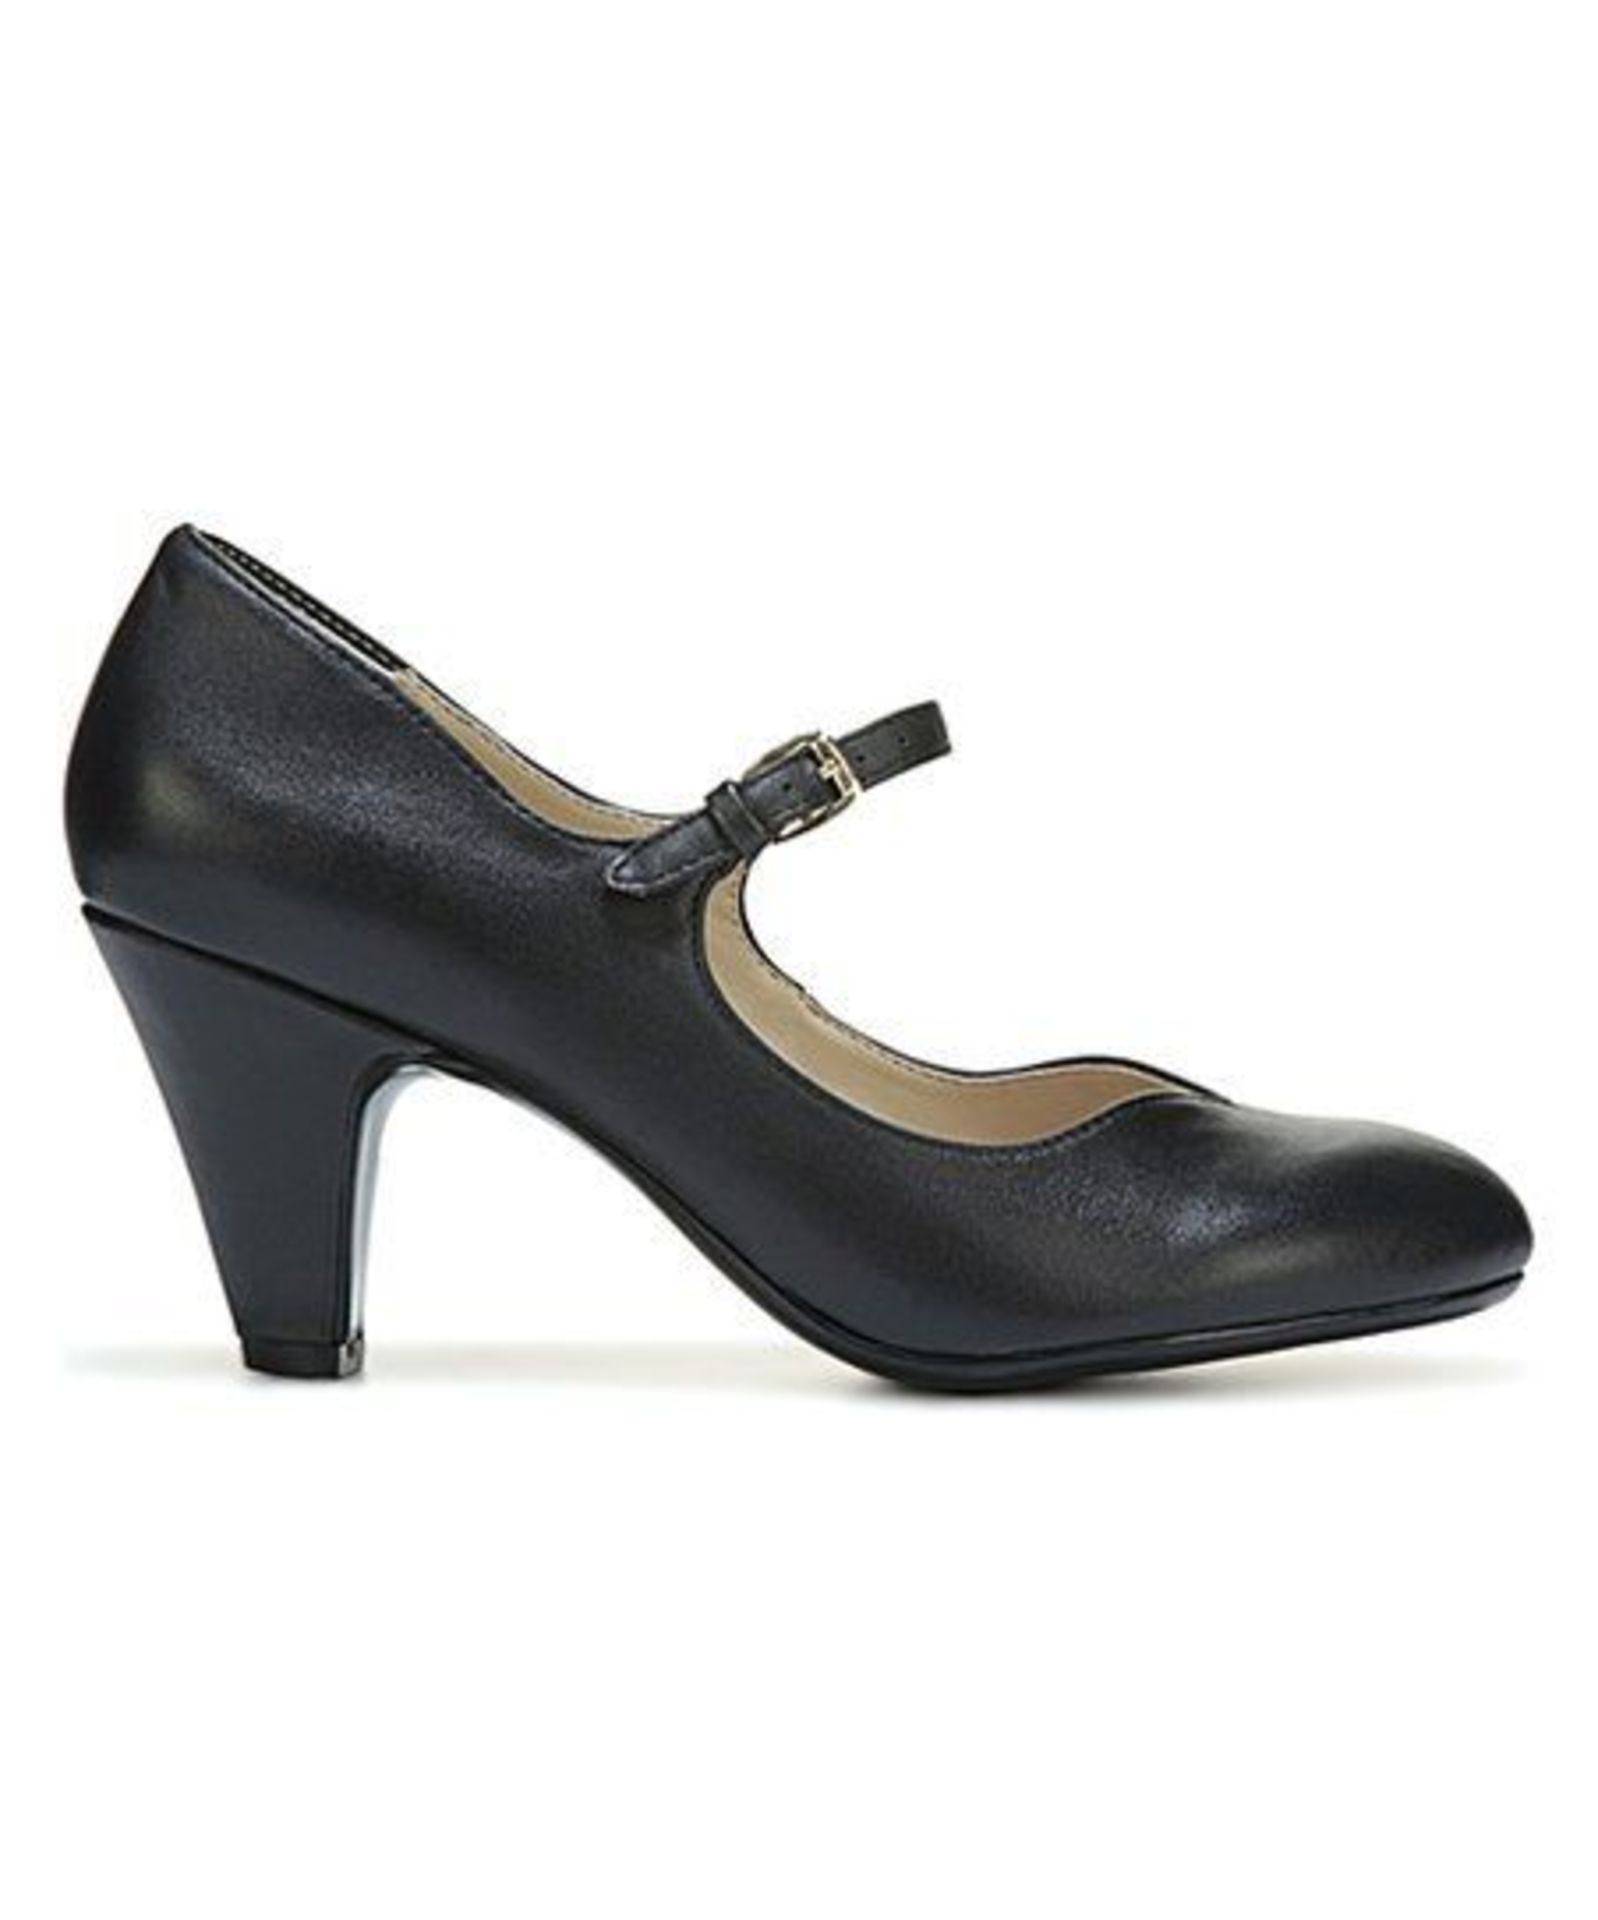 Naturalizer, Black Believe Pump, Size Uk 3.5-4 Eur 35.5 (New With Box) [Ref: 40957397 B] - Image 2 of 5